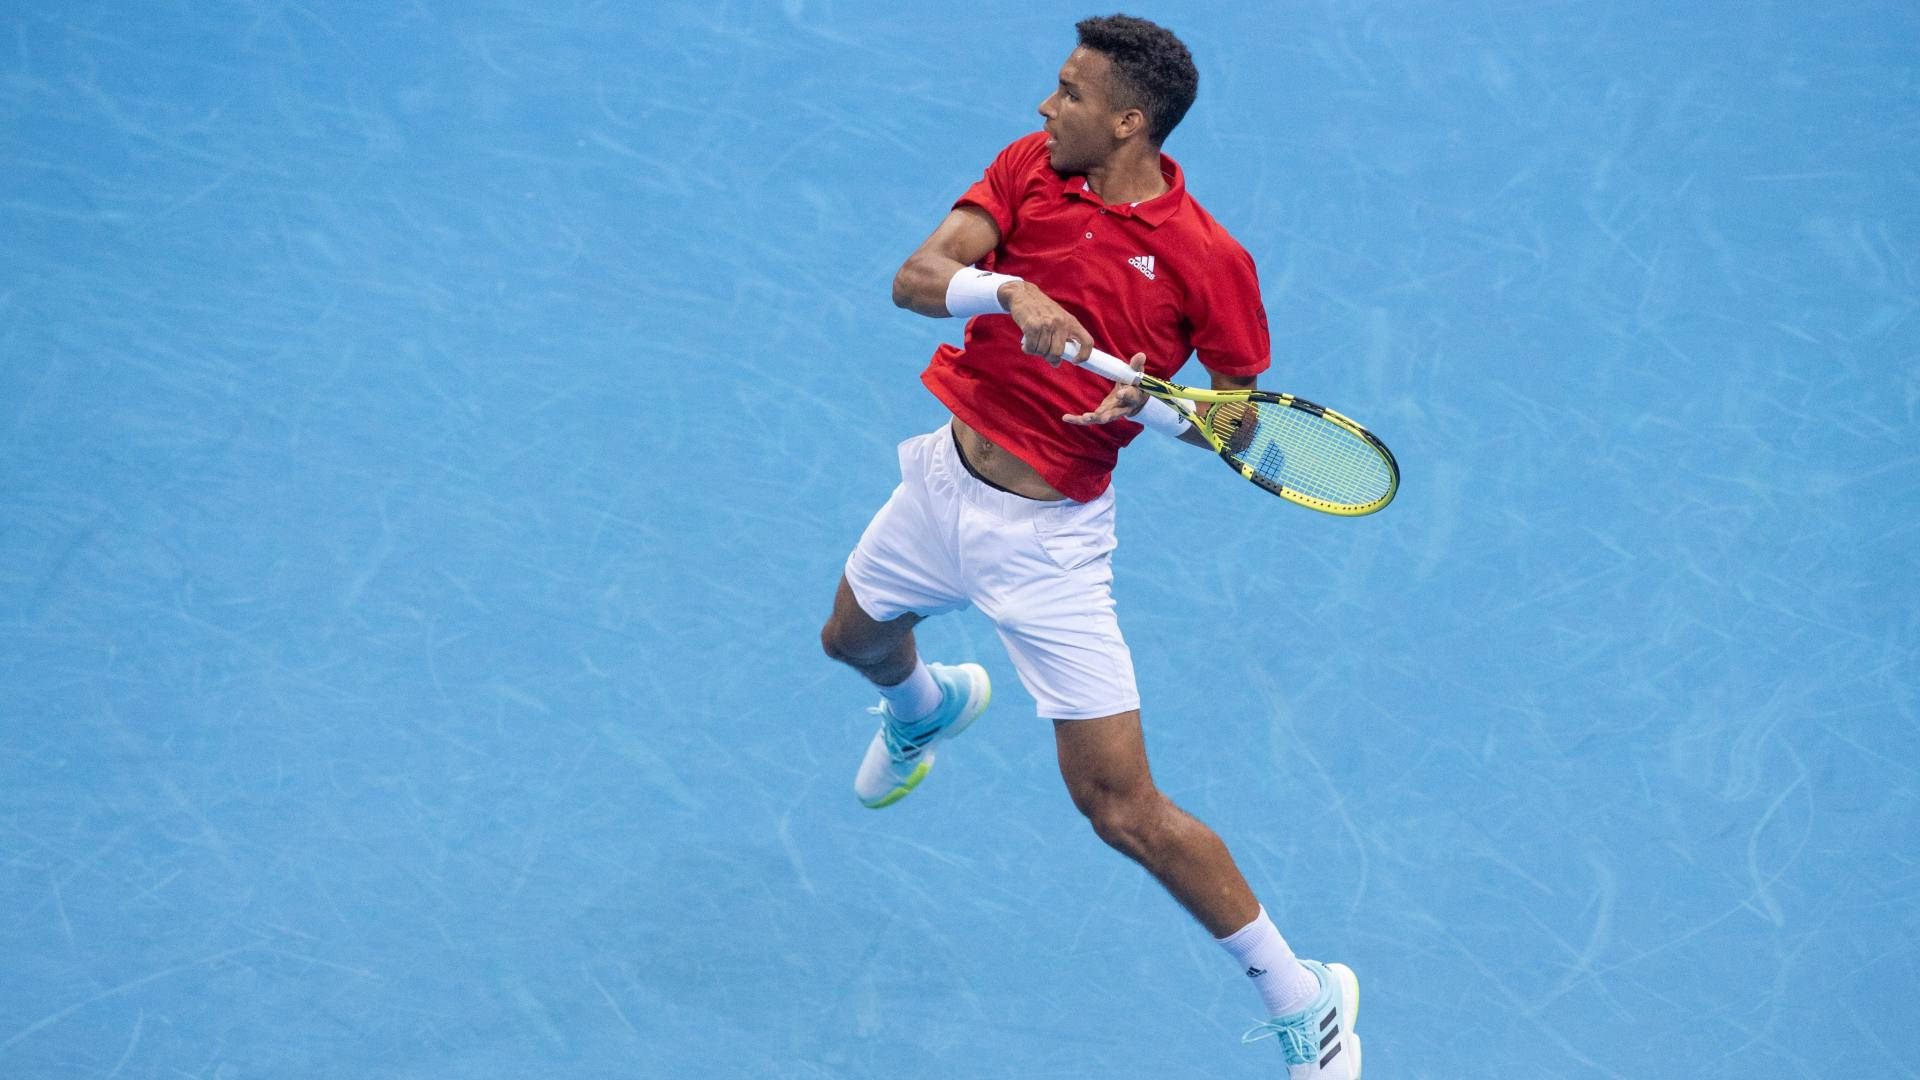 Caption: Professional Tennis Player Felix Auger Aliassime Showcasing His Footwork Skills Off the Court Wallpaper